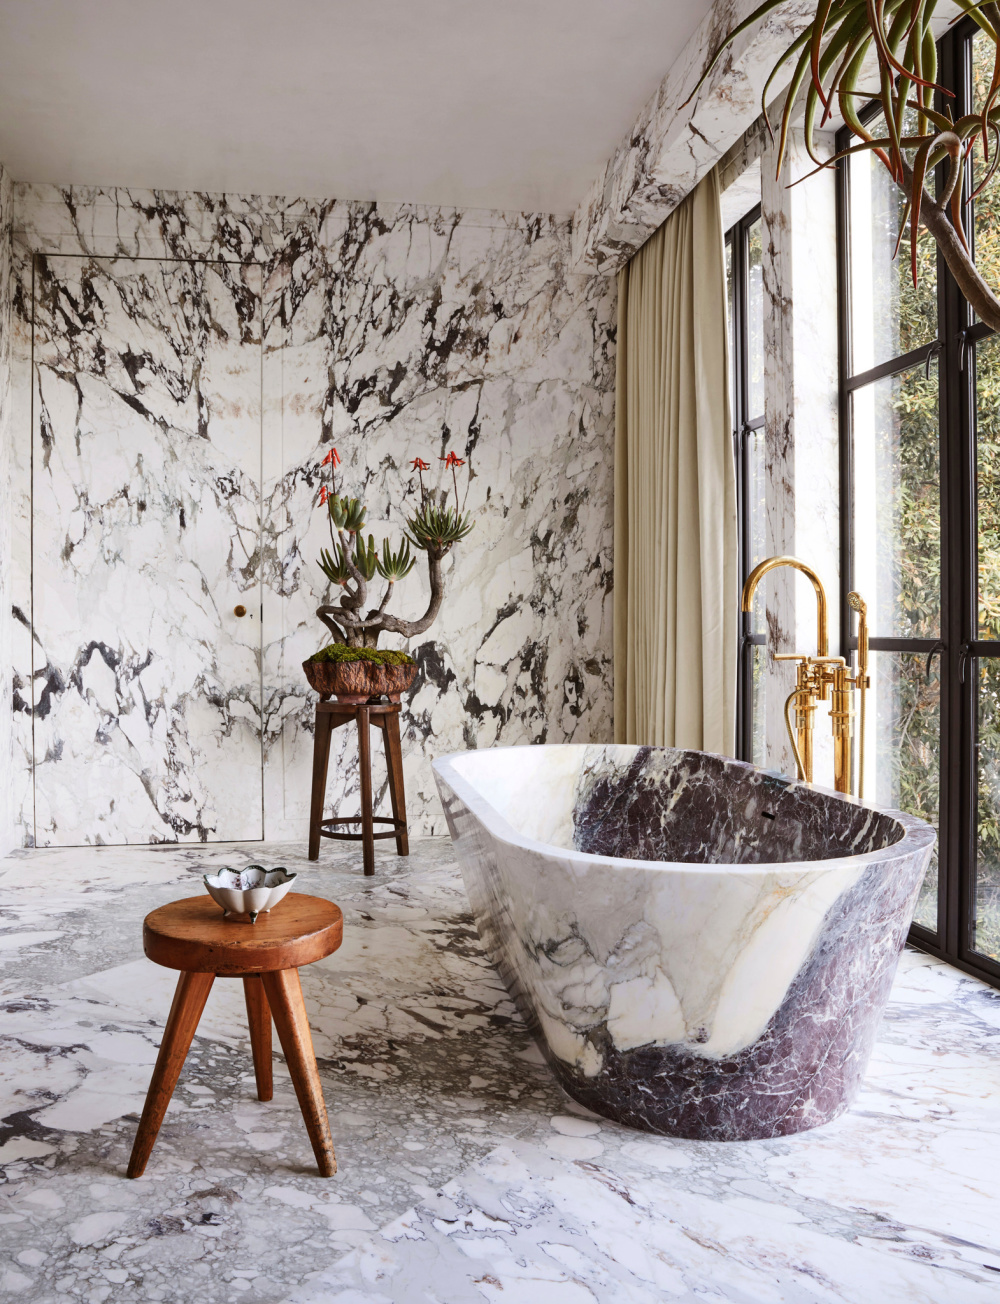 Luxurious fantasy bath with stone soaking tub and marble - in THE ULTIMATE BATH by Barbara Sallick (Rizzoli, 2022).